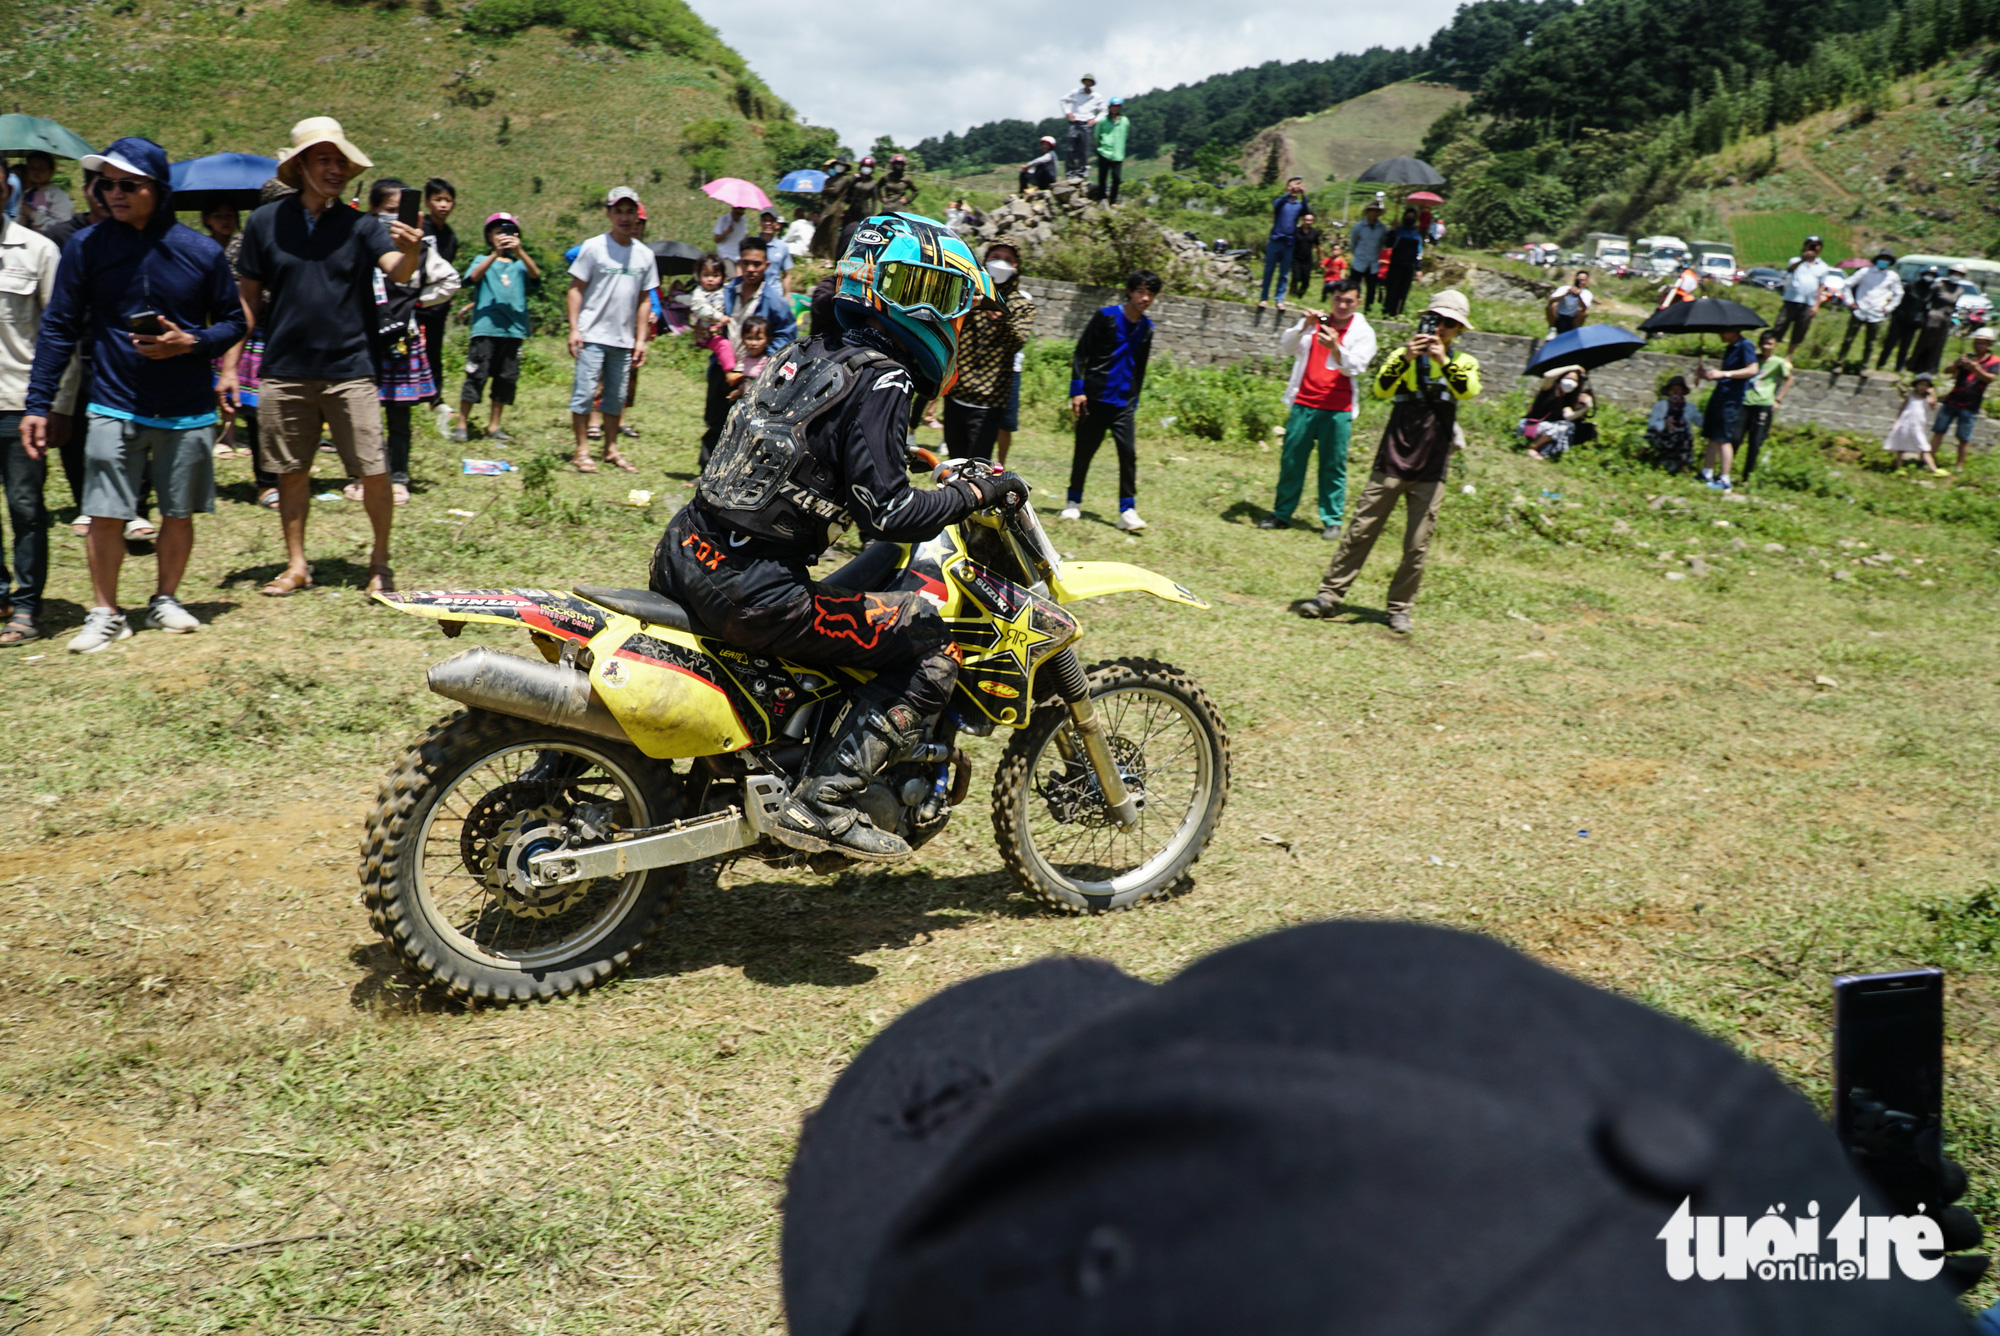 Spectators watch a rider racing in the final race of the 2023 VTV Cab - Off-road motorcycle racing tournament in Van Ho District, Son La Province, Vietnam, May 28, 2023. Photo: Nguyen Hien / Tuoi Tre